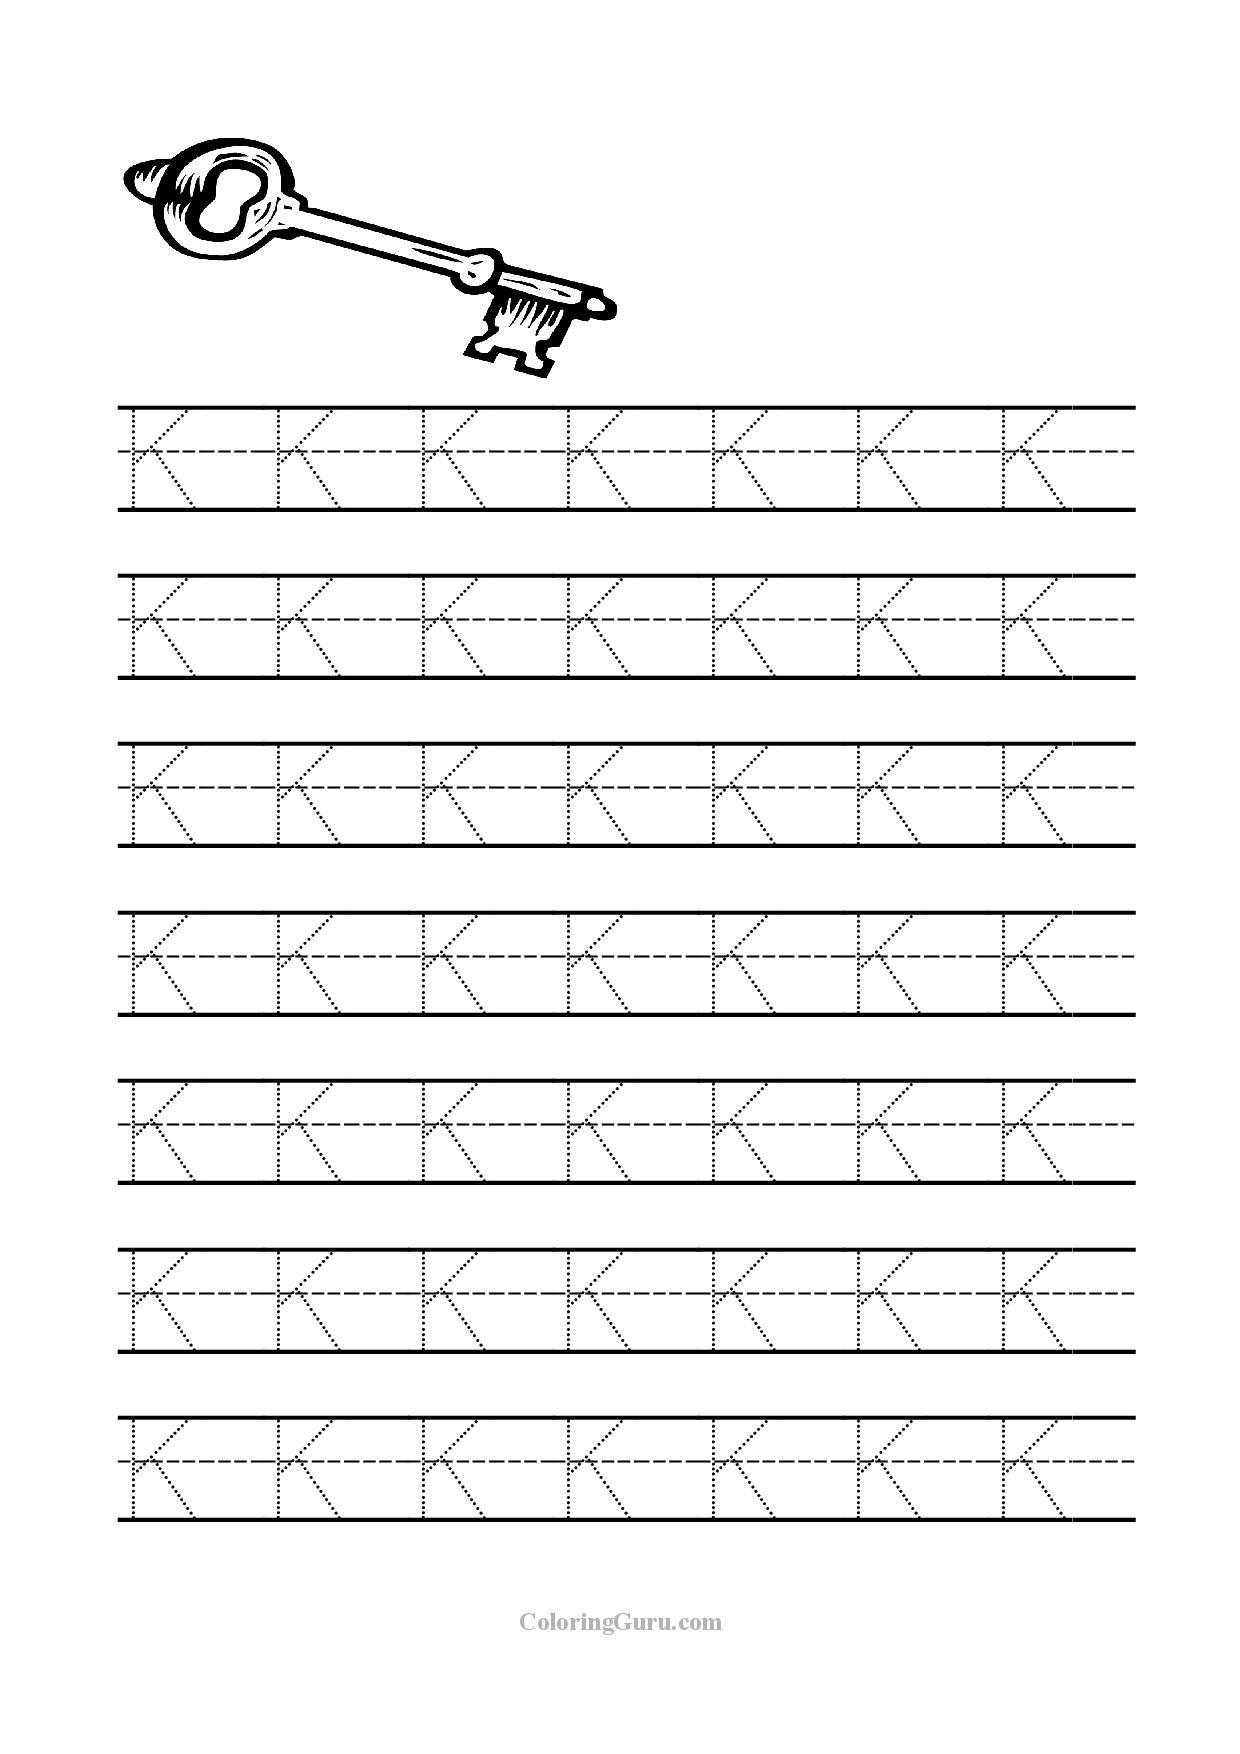 15-learning-the-letter-k-worksheets-kittybabylovecom-free-letter-a-tracing-worksheet-alphabet